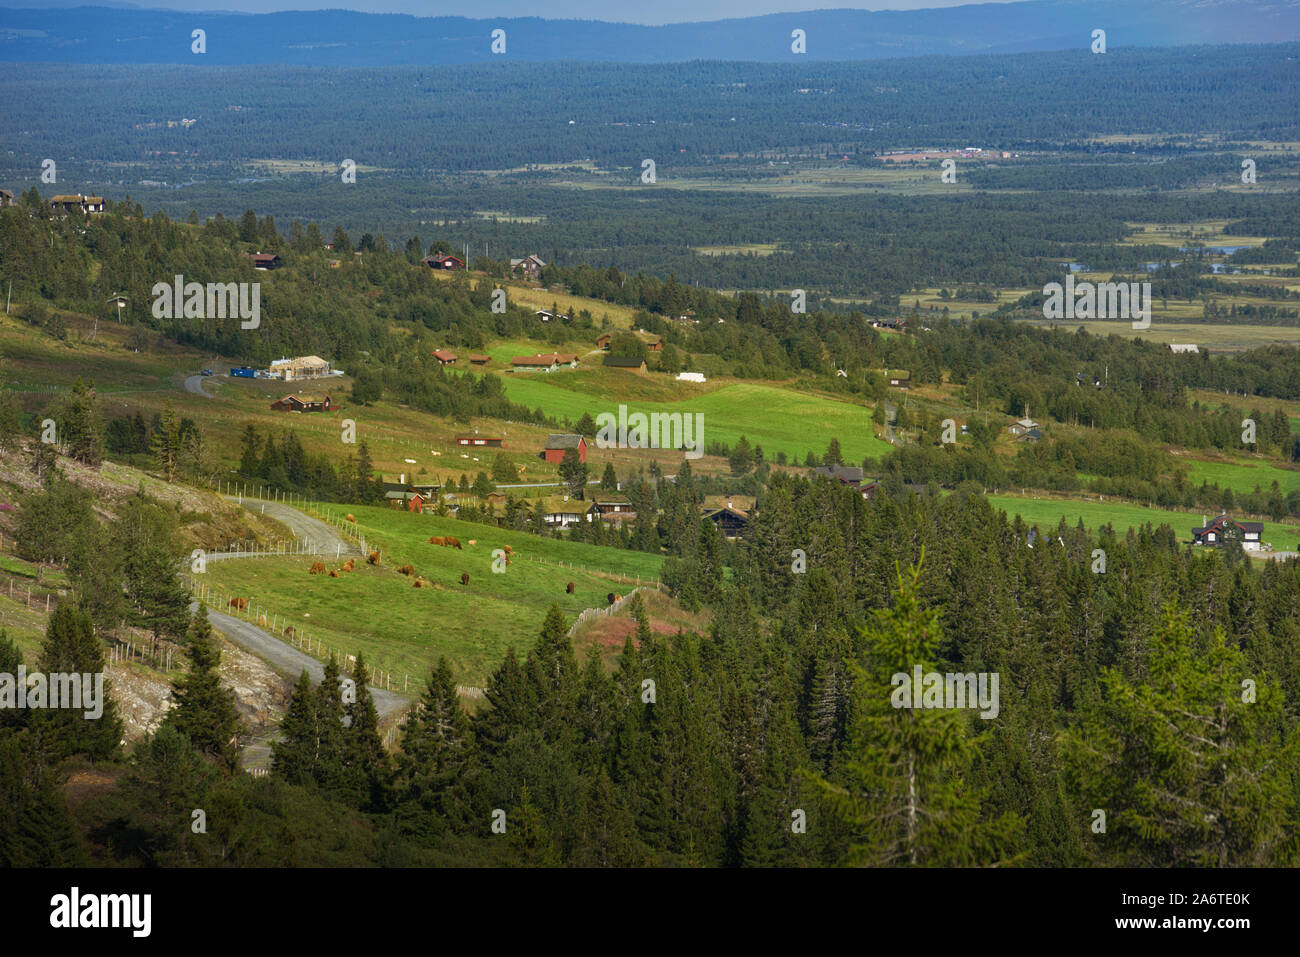 Cultural landscape in the mountains, Gol, Norway Stock Photo